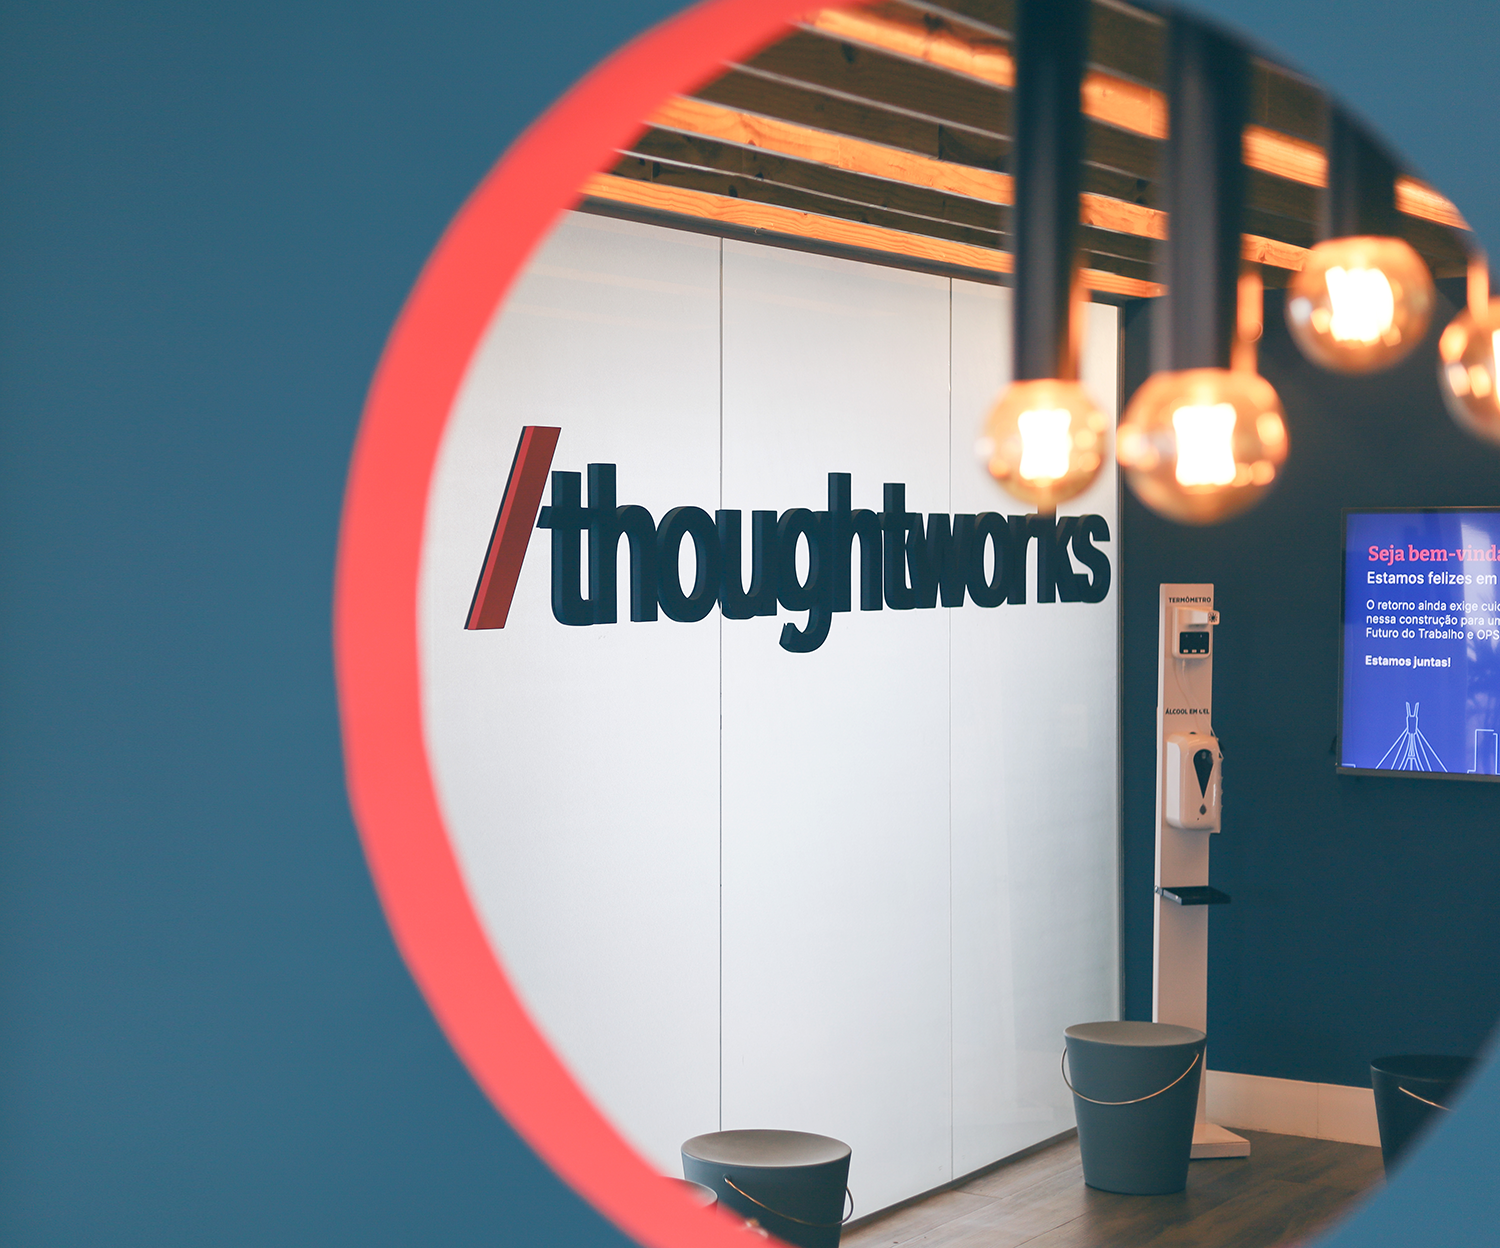 Image of the Thoughtworks office in Recife, showing the reception with the logo on the wall, a television, and lights illuminating the space.